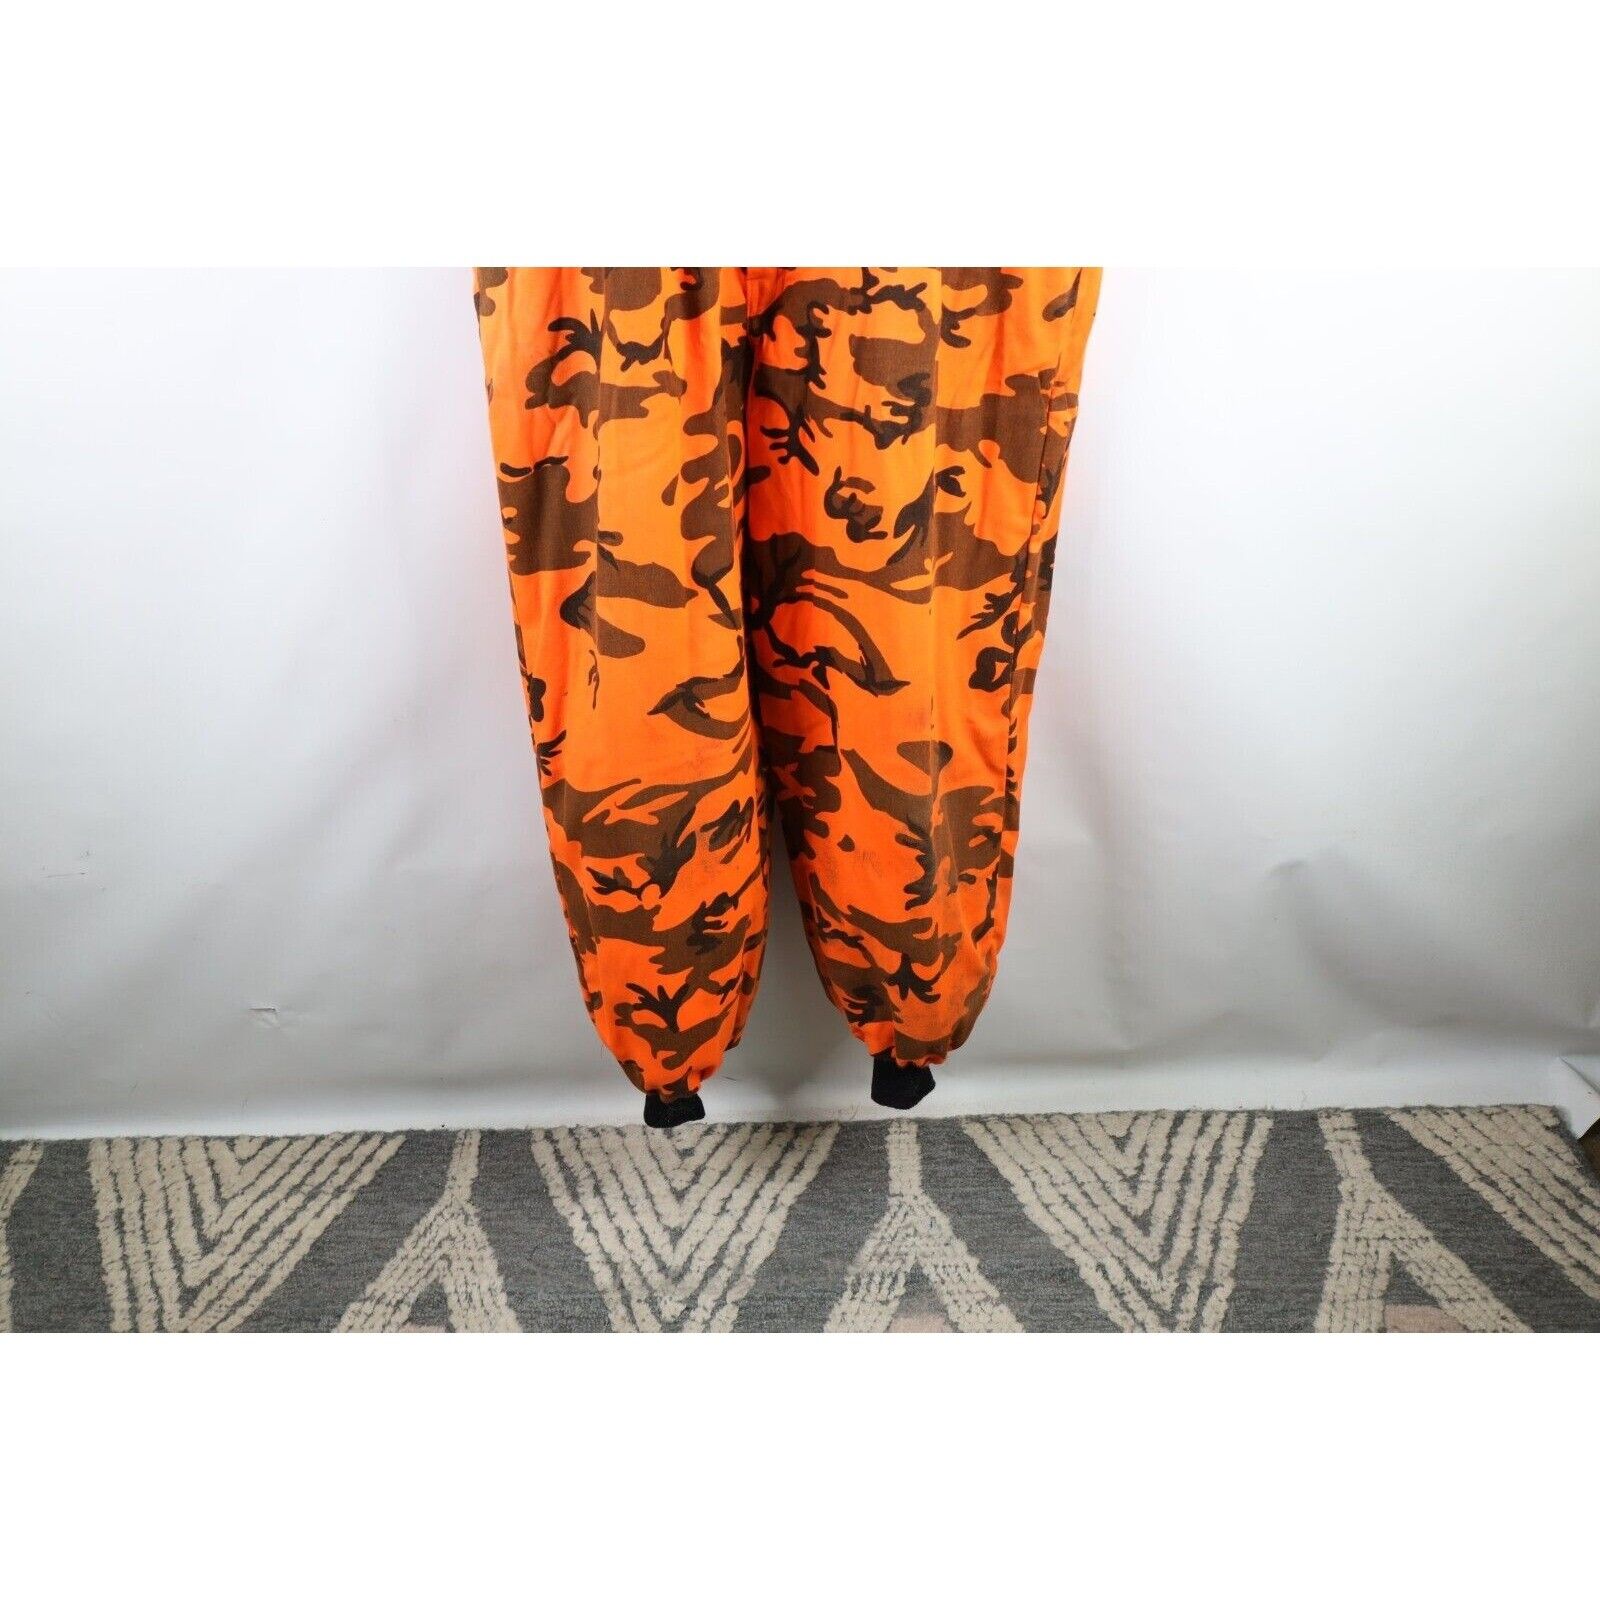 Vintage Vintage 70s Streetwear 3XL Insulated Camouflage Overalls Size US 44 / EU 60 - 4 Thumbnail